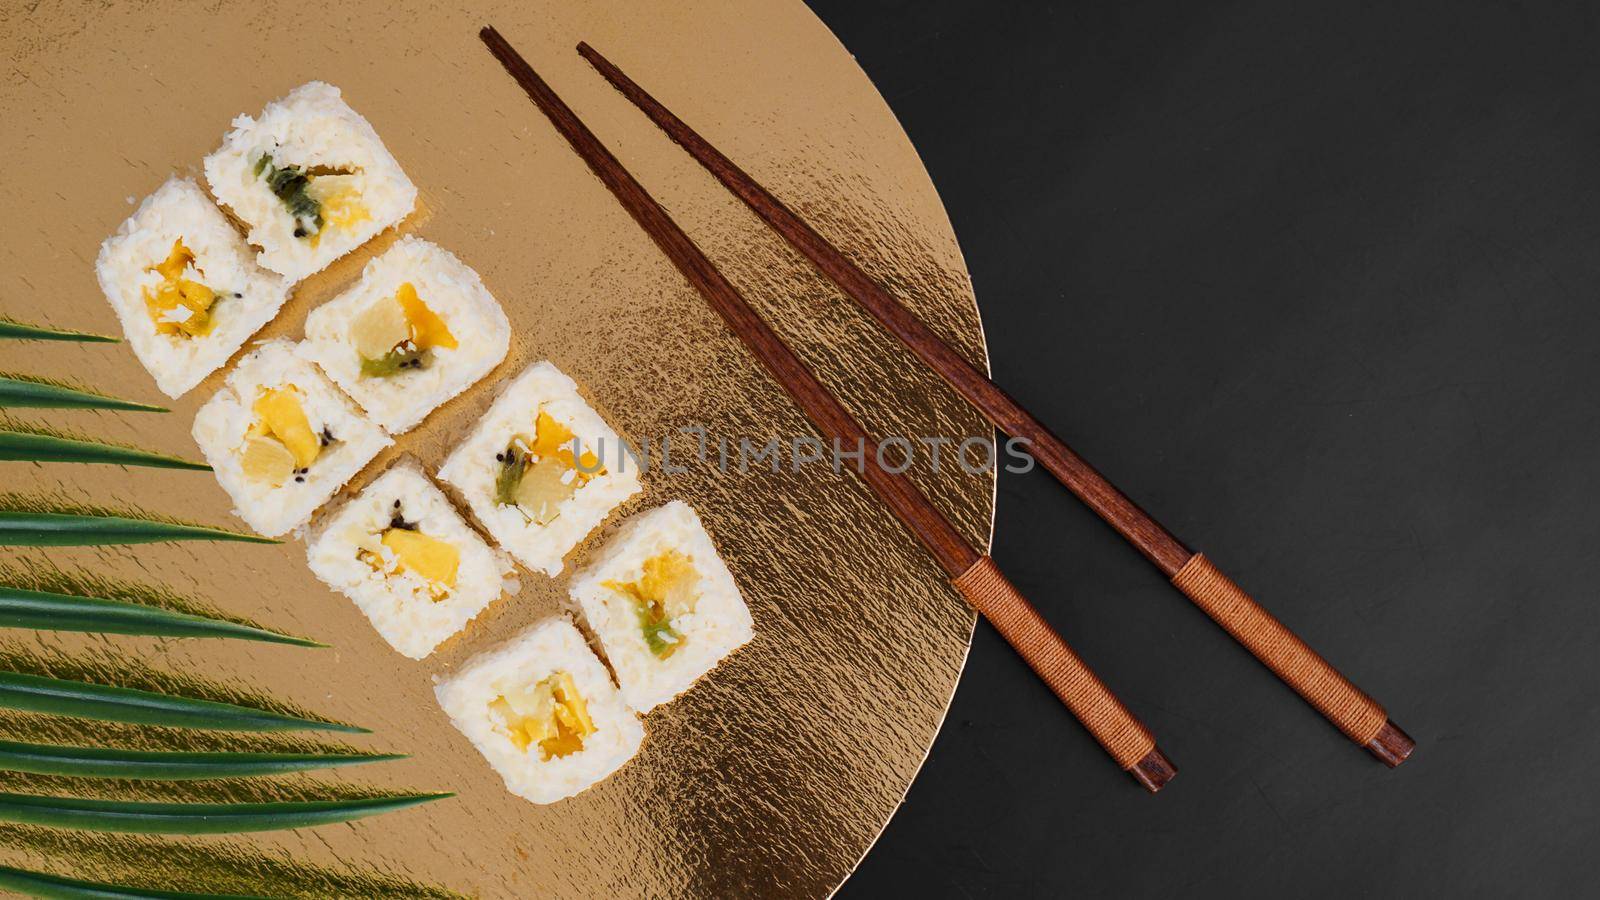 Dessert Sushi - Roll with Various Fruit and Cream Cheese inside. On a gold background and with a tropical leaf